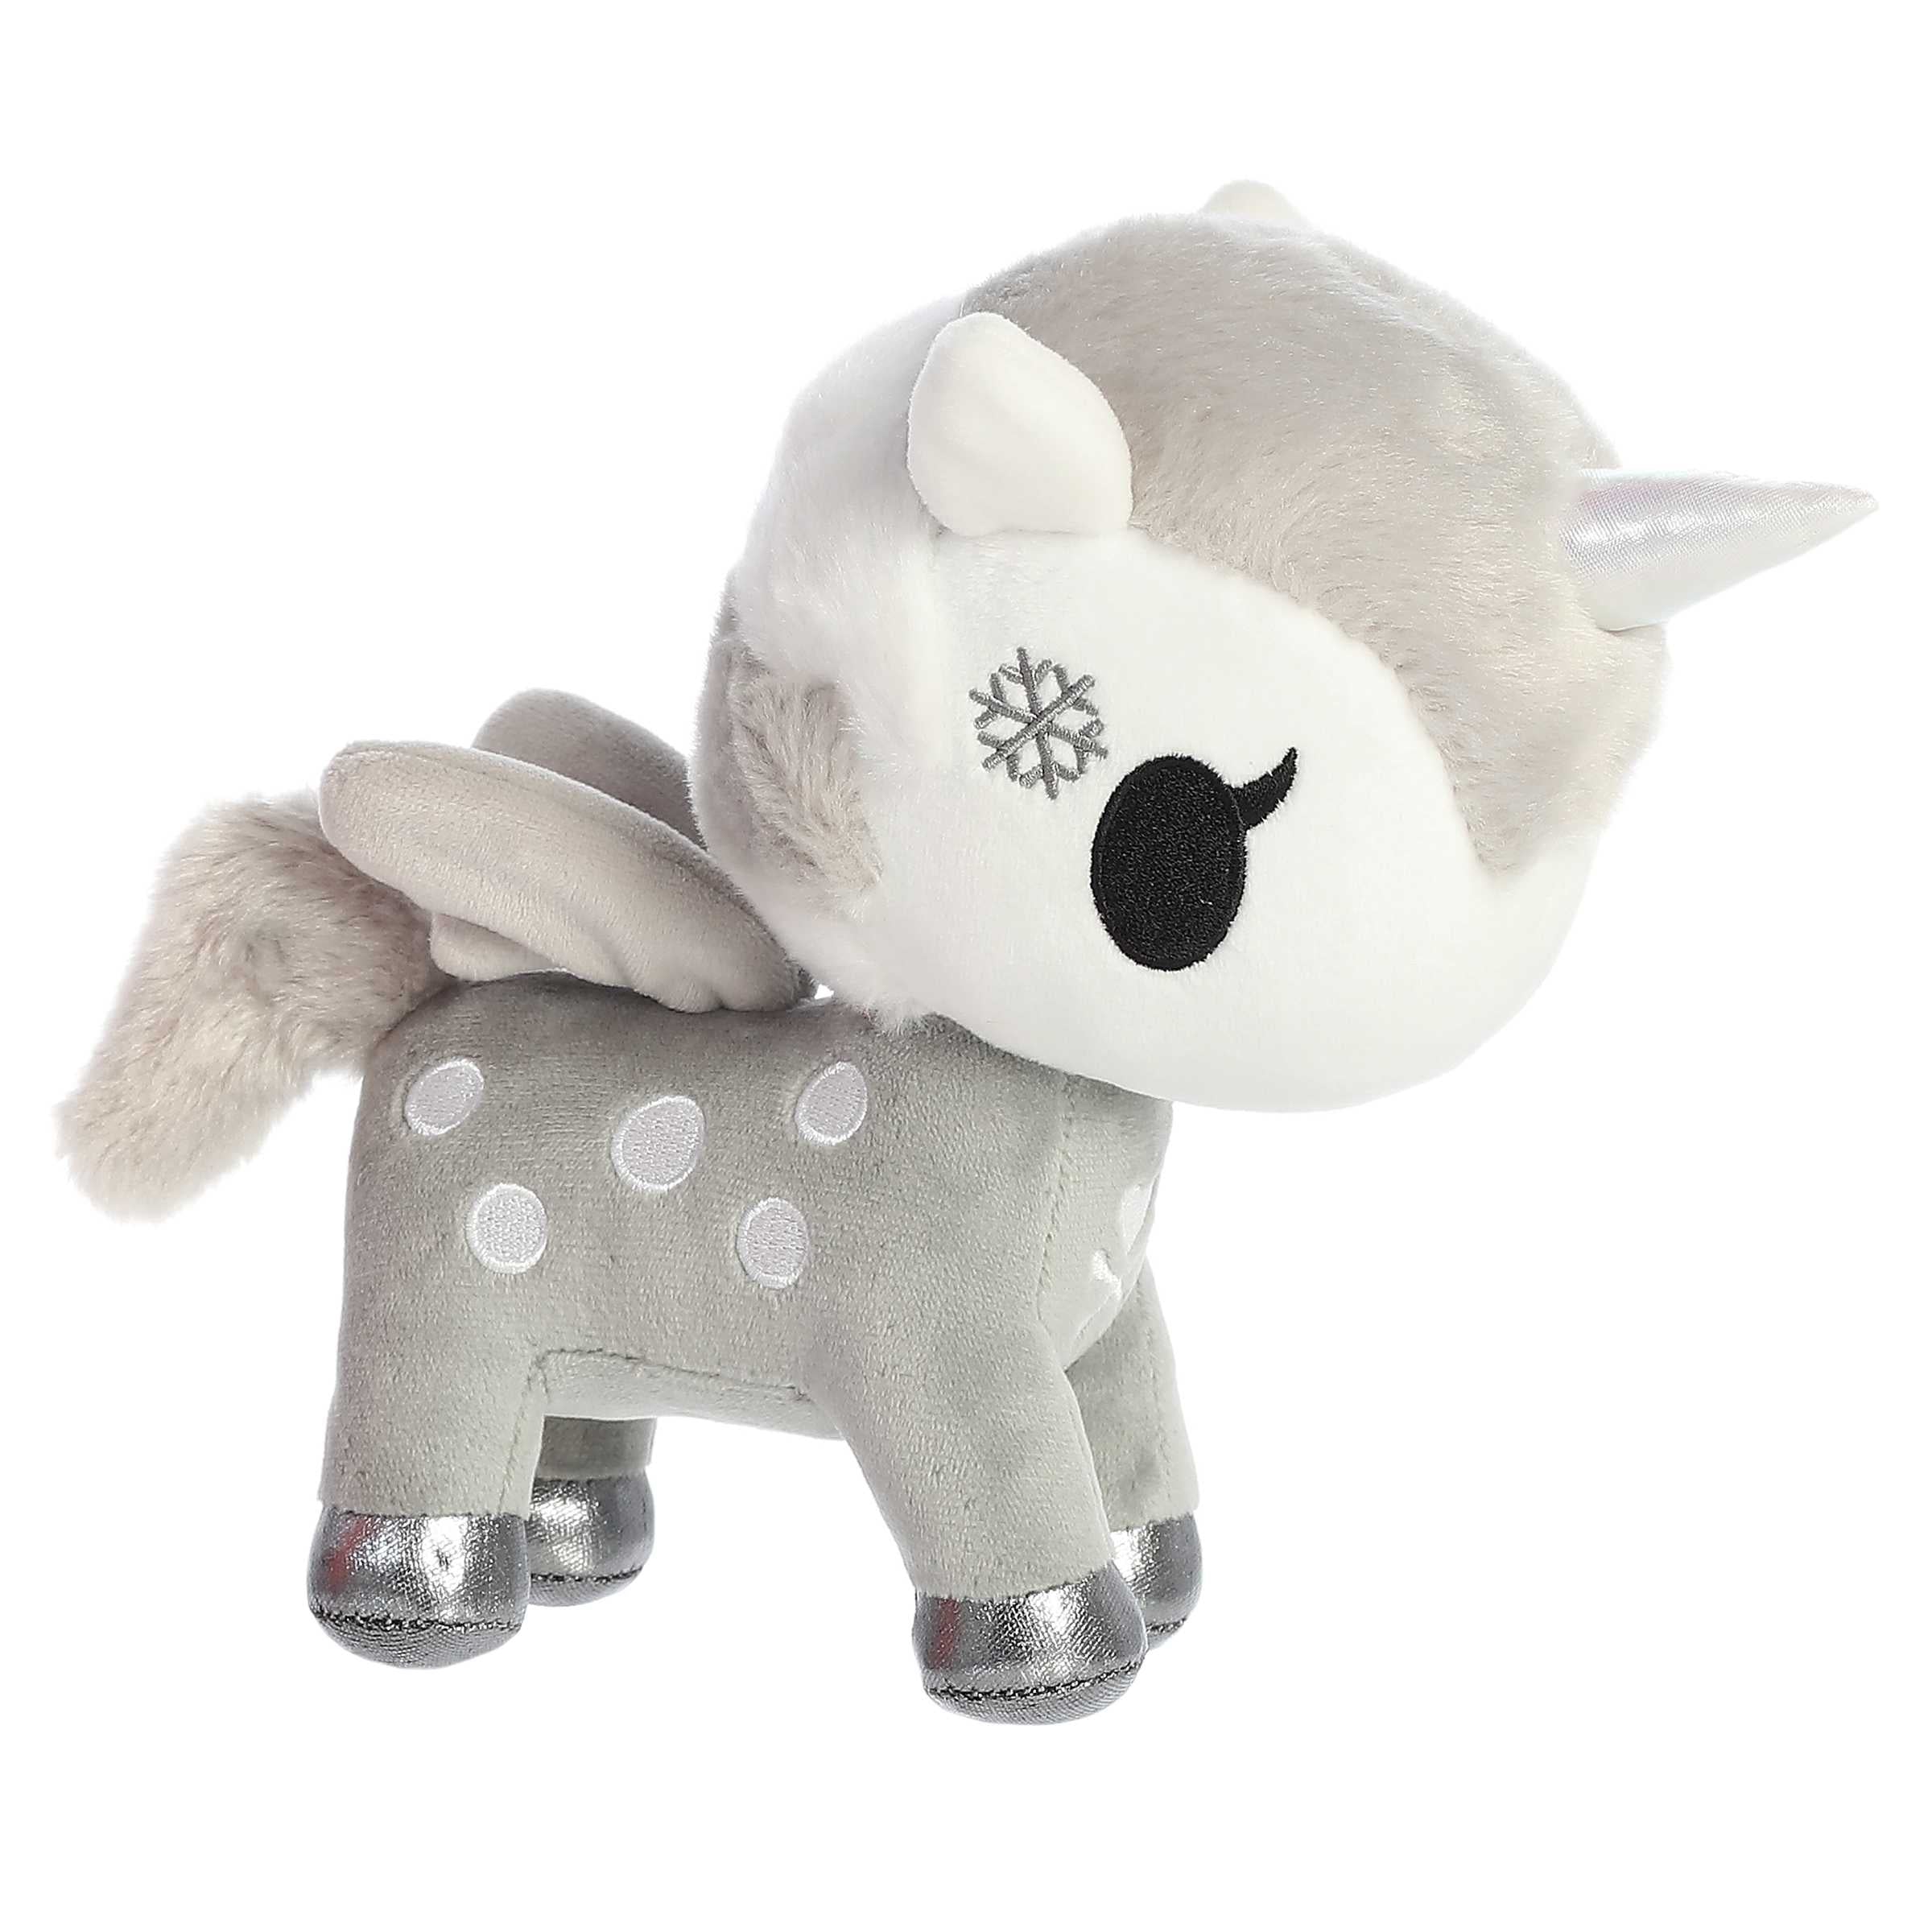 grey and white Unicorno plush, Snowballs, with glittery horn and winter embroidery, offers a magical snuggle on cold days.